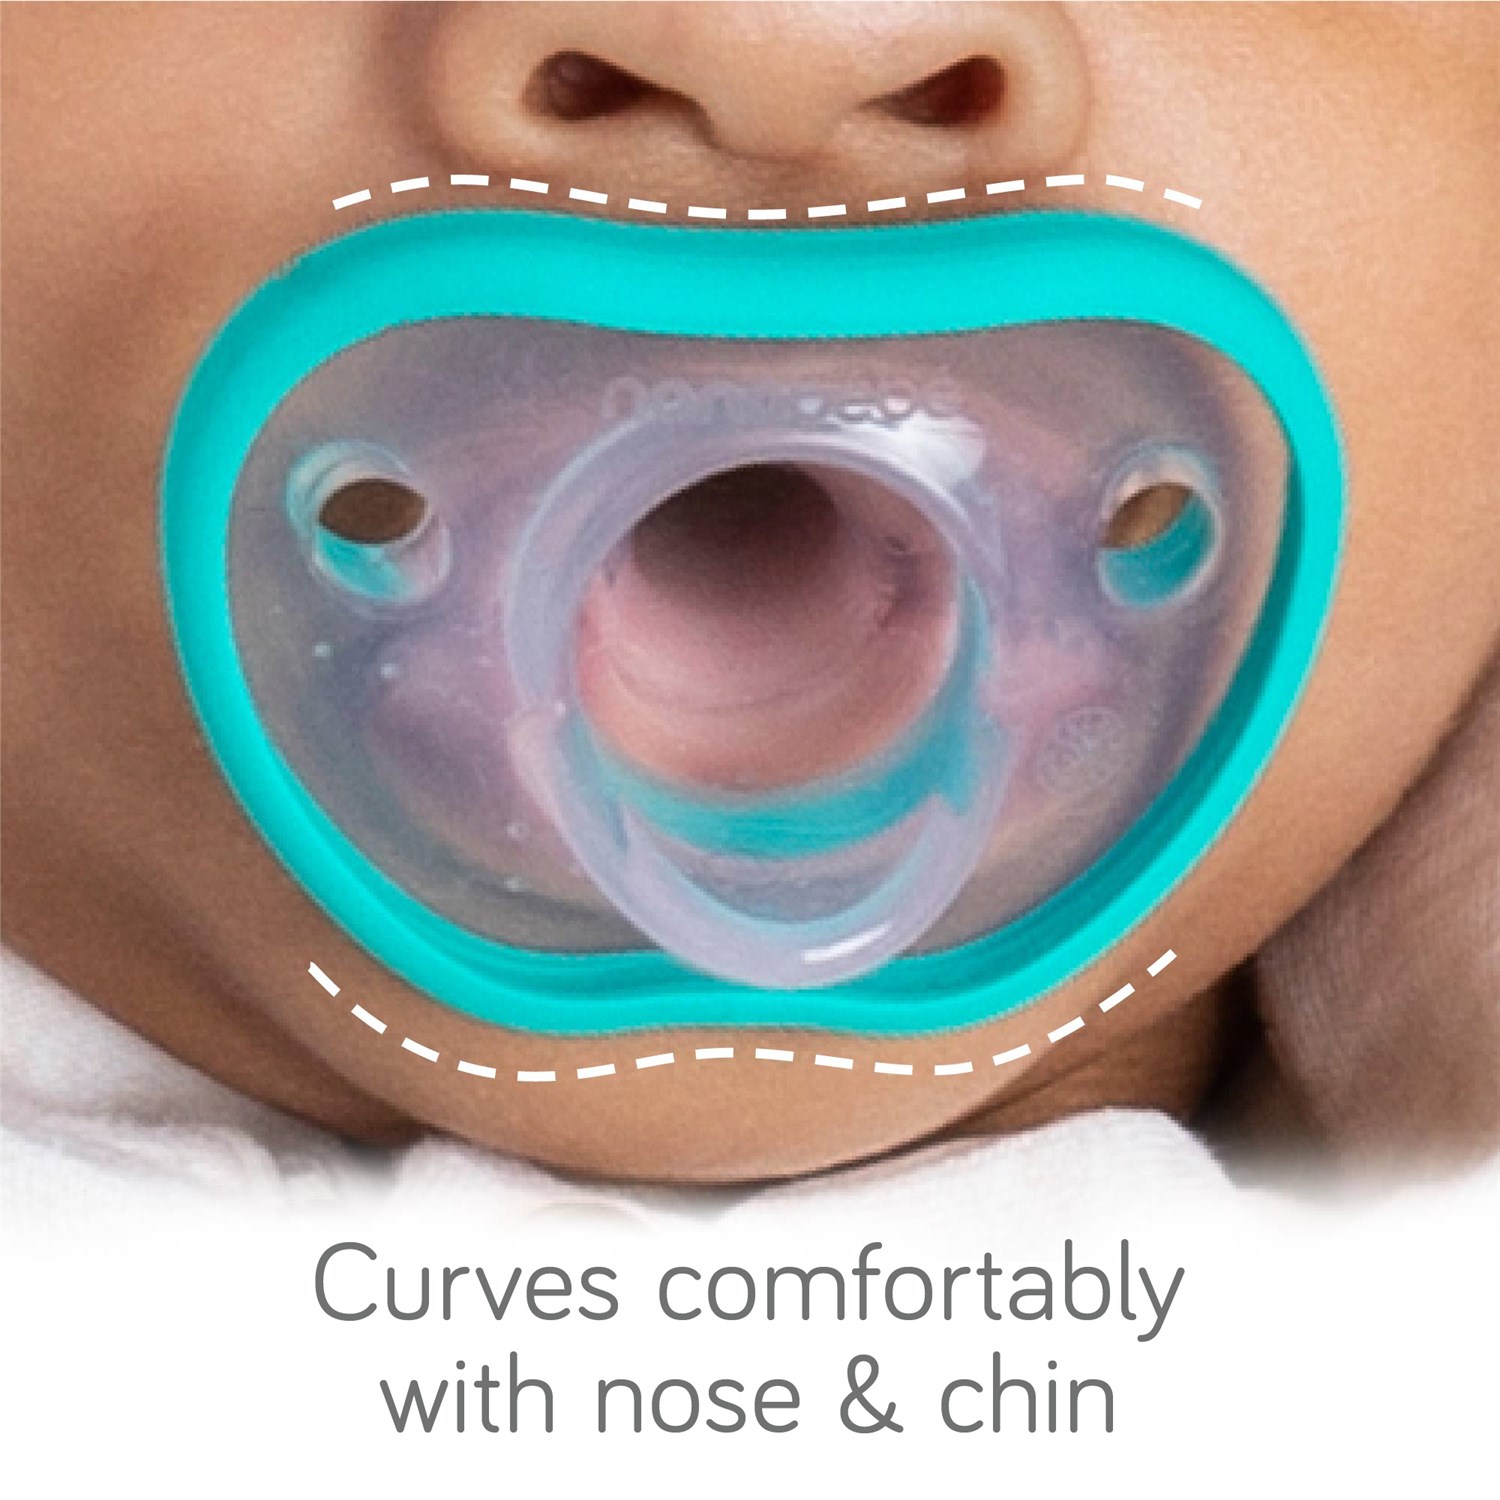 Nanobebe Flexy Baby Pacifiers in Teal, Pink, White, or Gray | 2-Pack - image 5 of 10